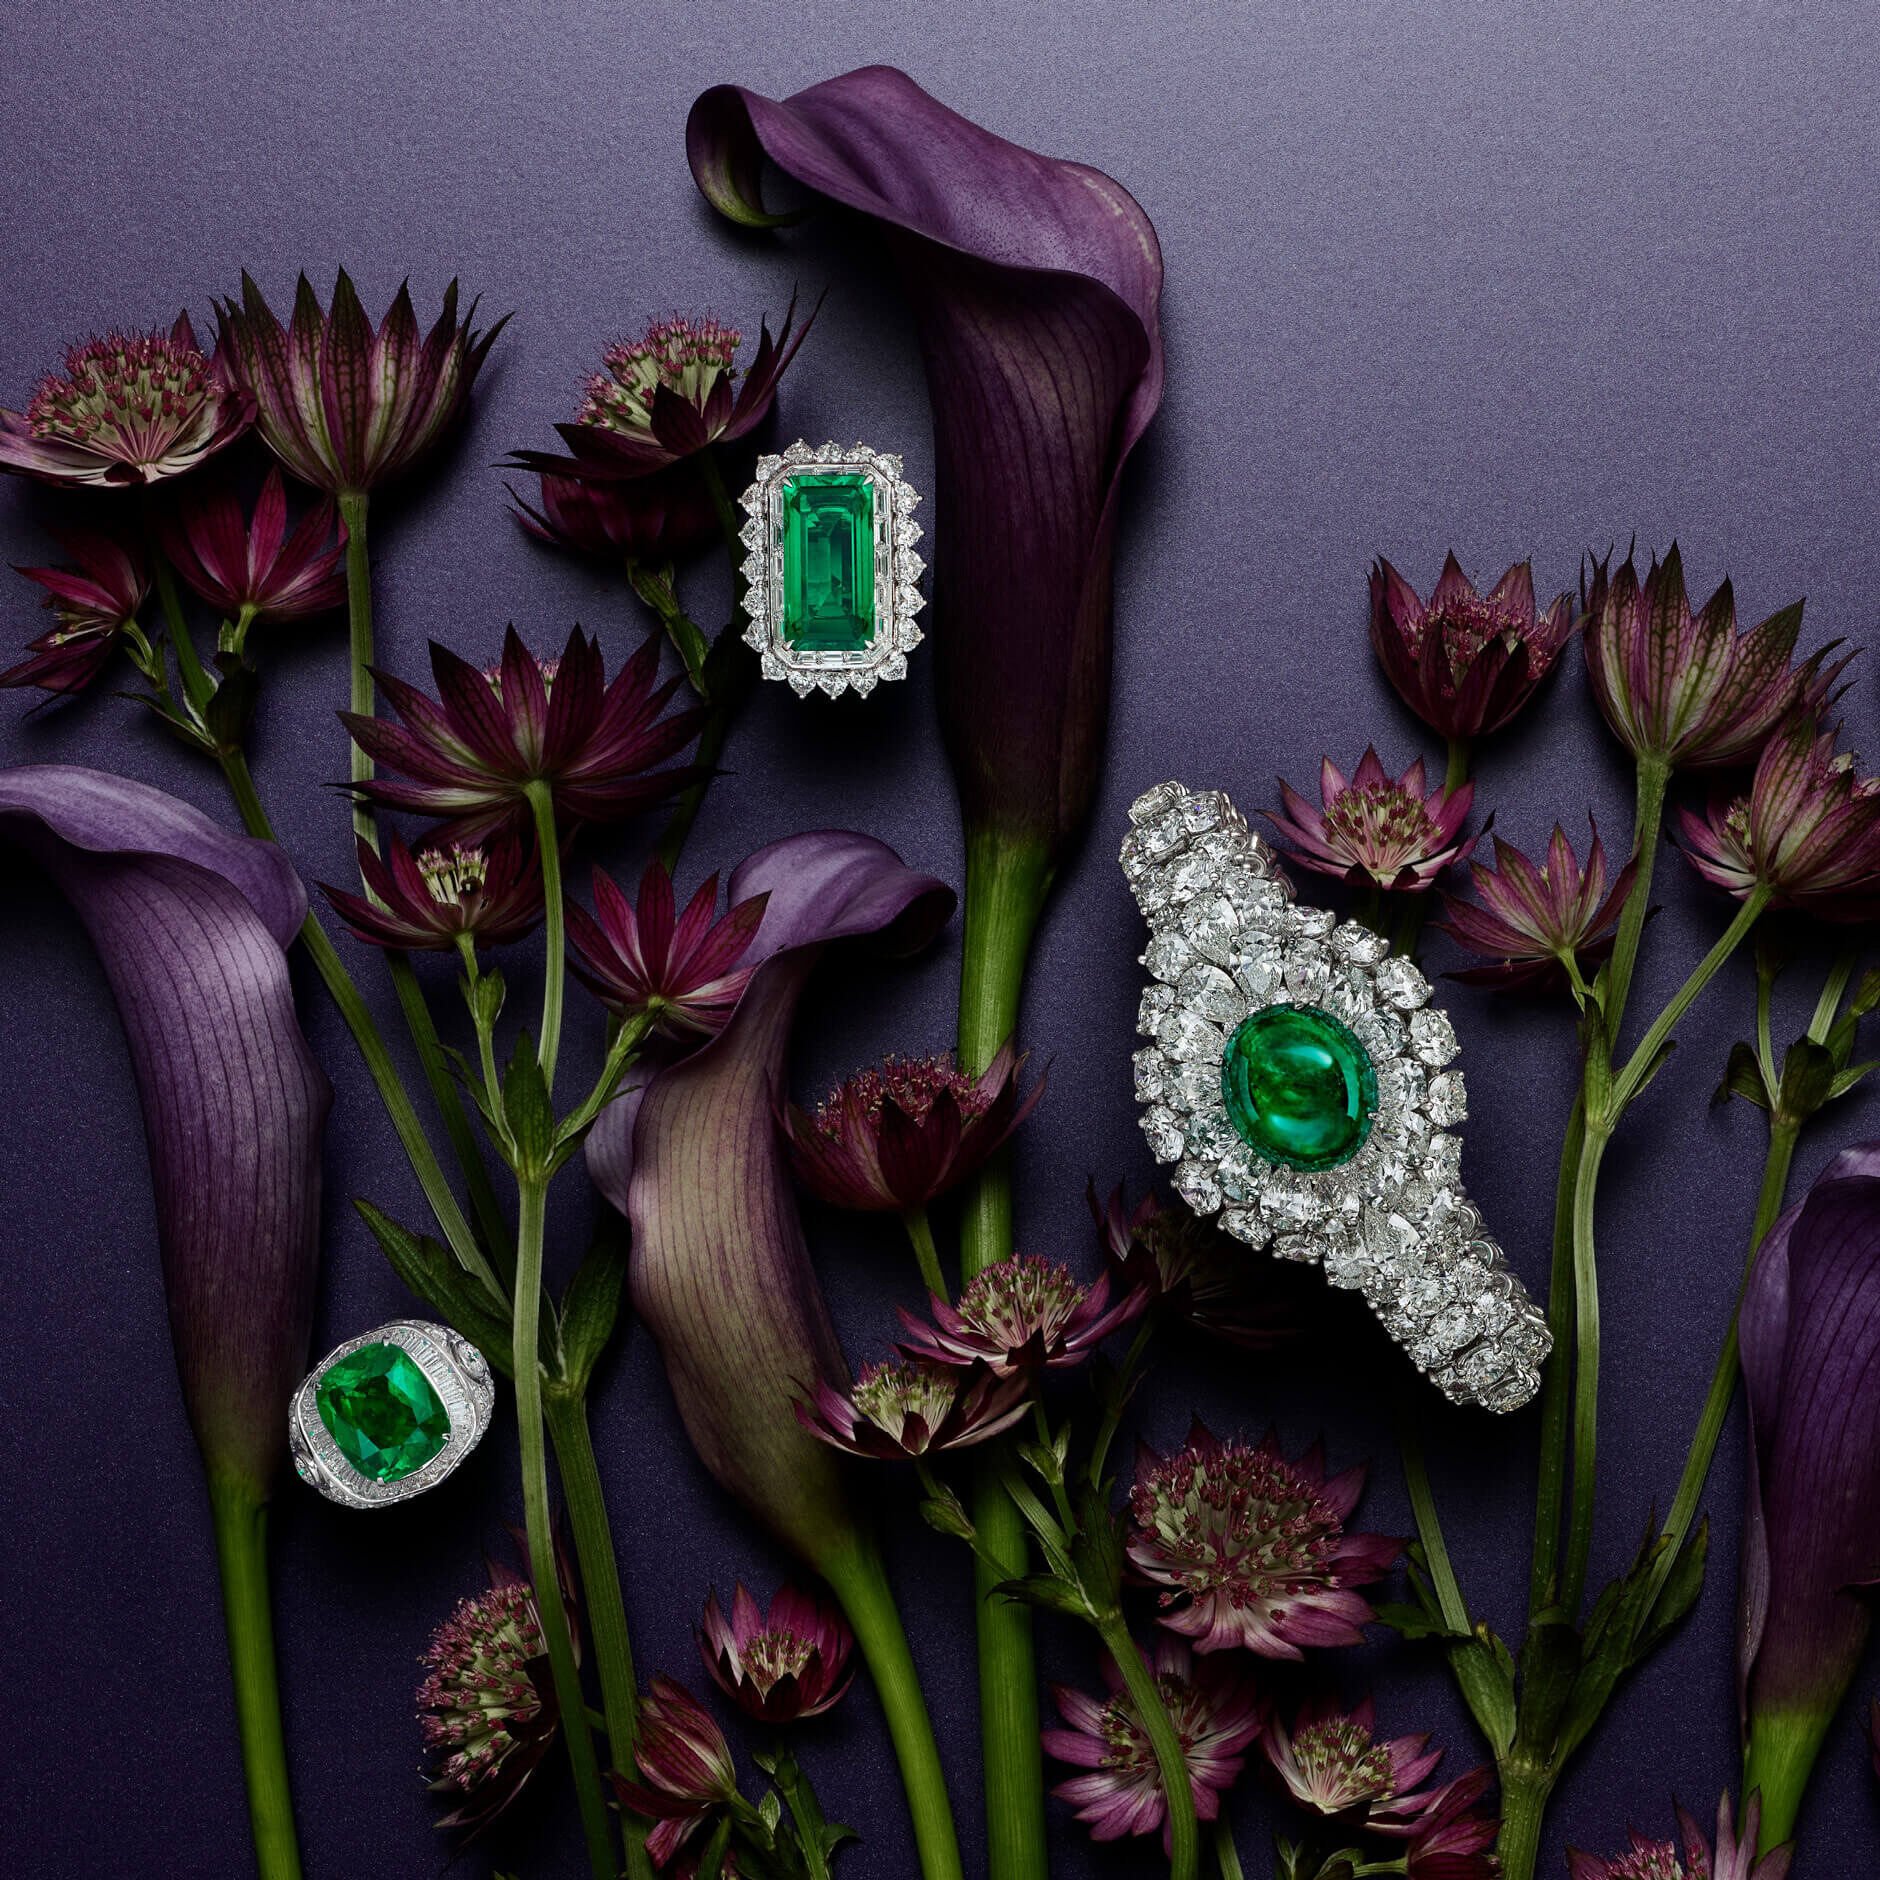 Graff emerald and diamond High jewellery with flowers decorations